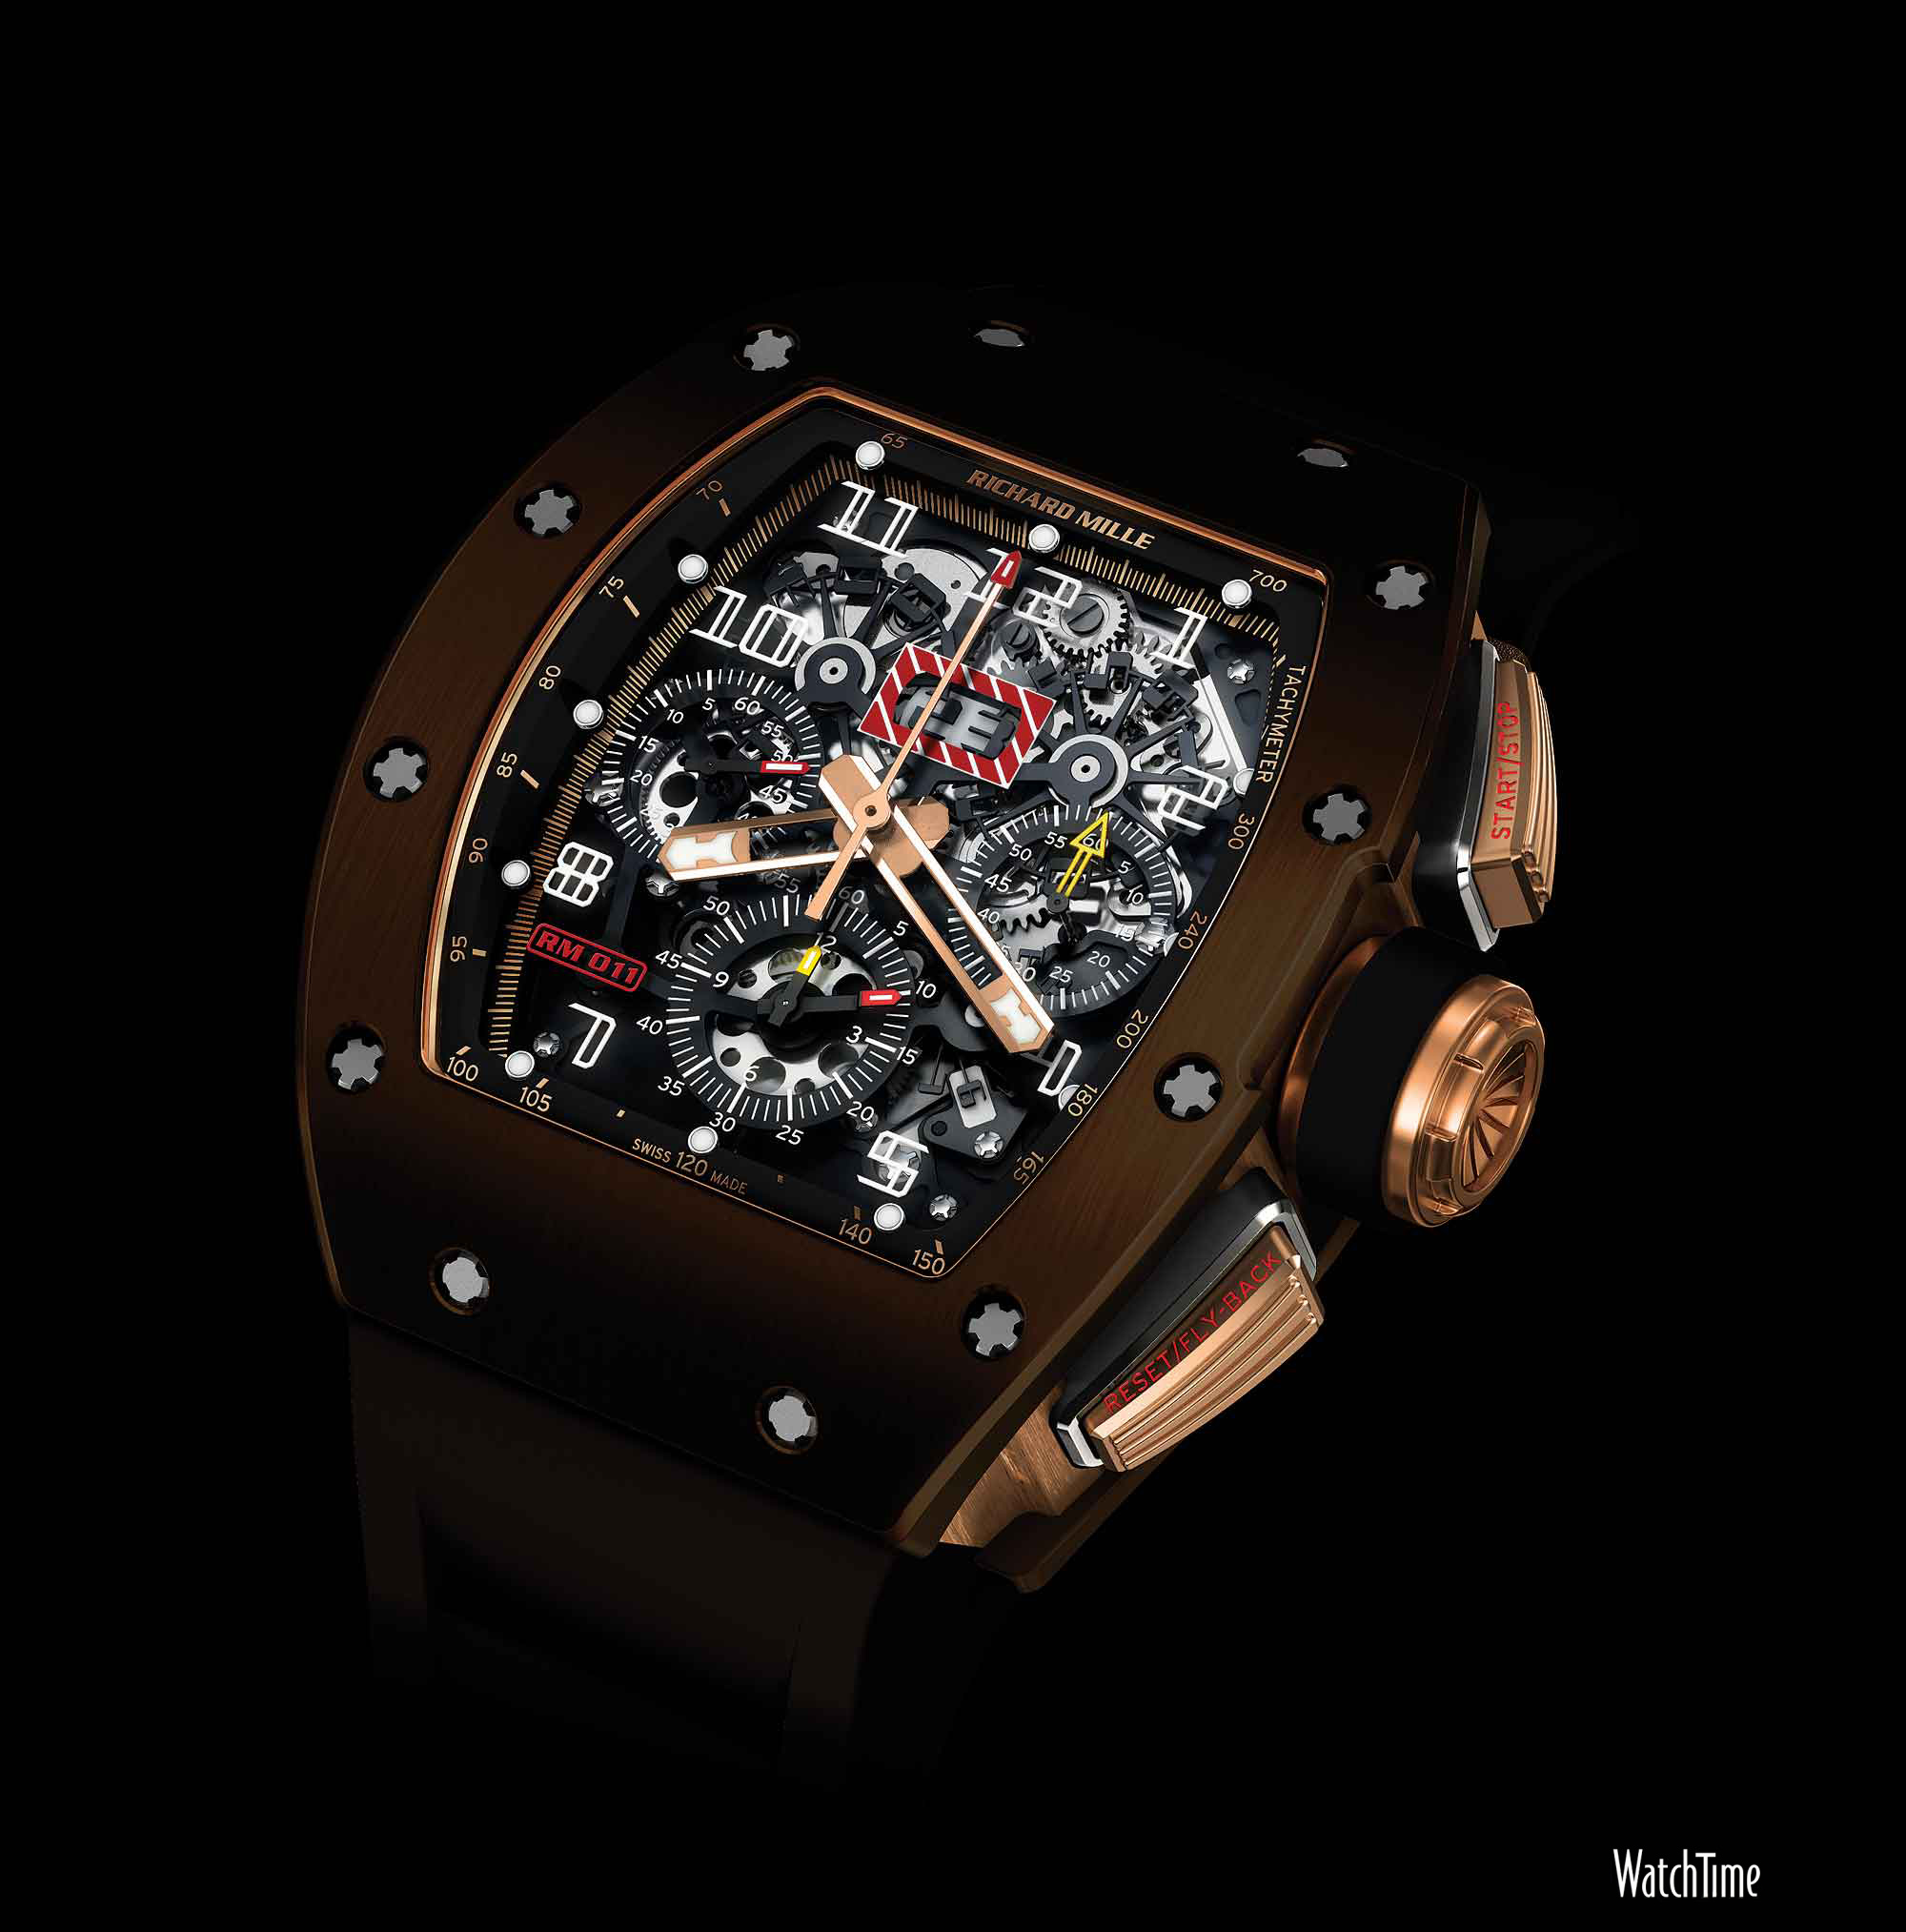 Richard Mille S New Rm Brings Another F1 Material To